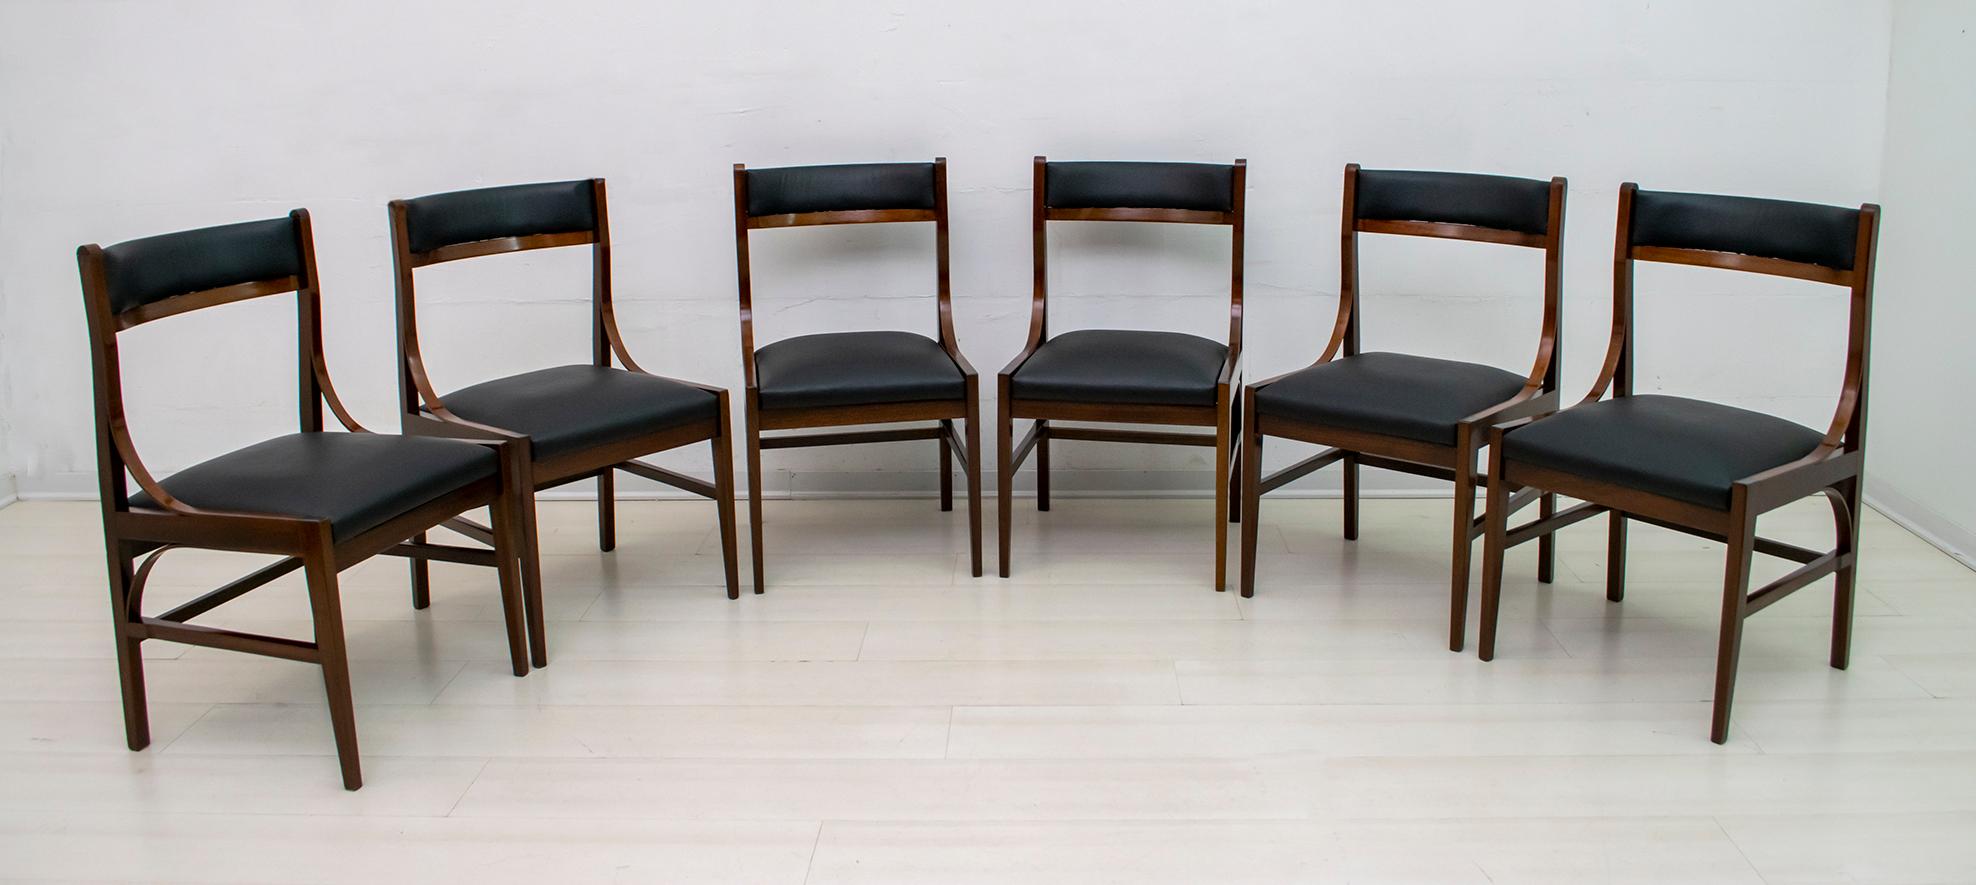 Six chairs mod. 110 by Ico Parisi. Italy, 1961. Produced by Sons of Amedeo Cassina, Meda. Mahogany wood.
The chairs have been polished with shellac and have a new leather upholstery.